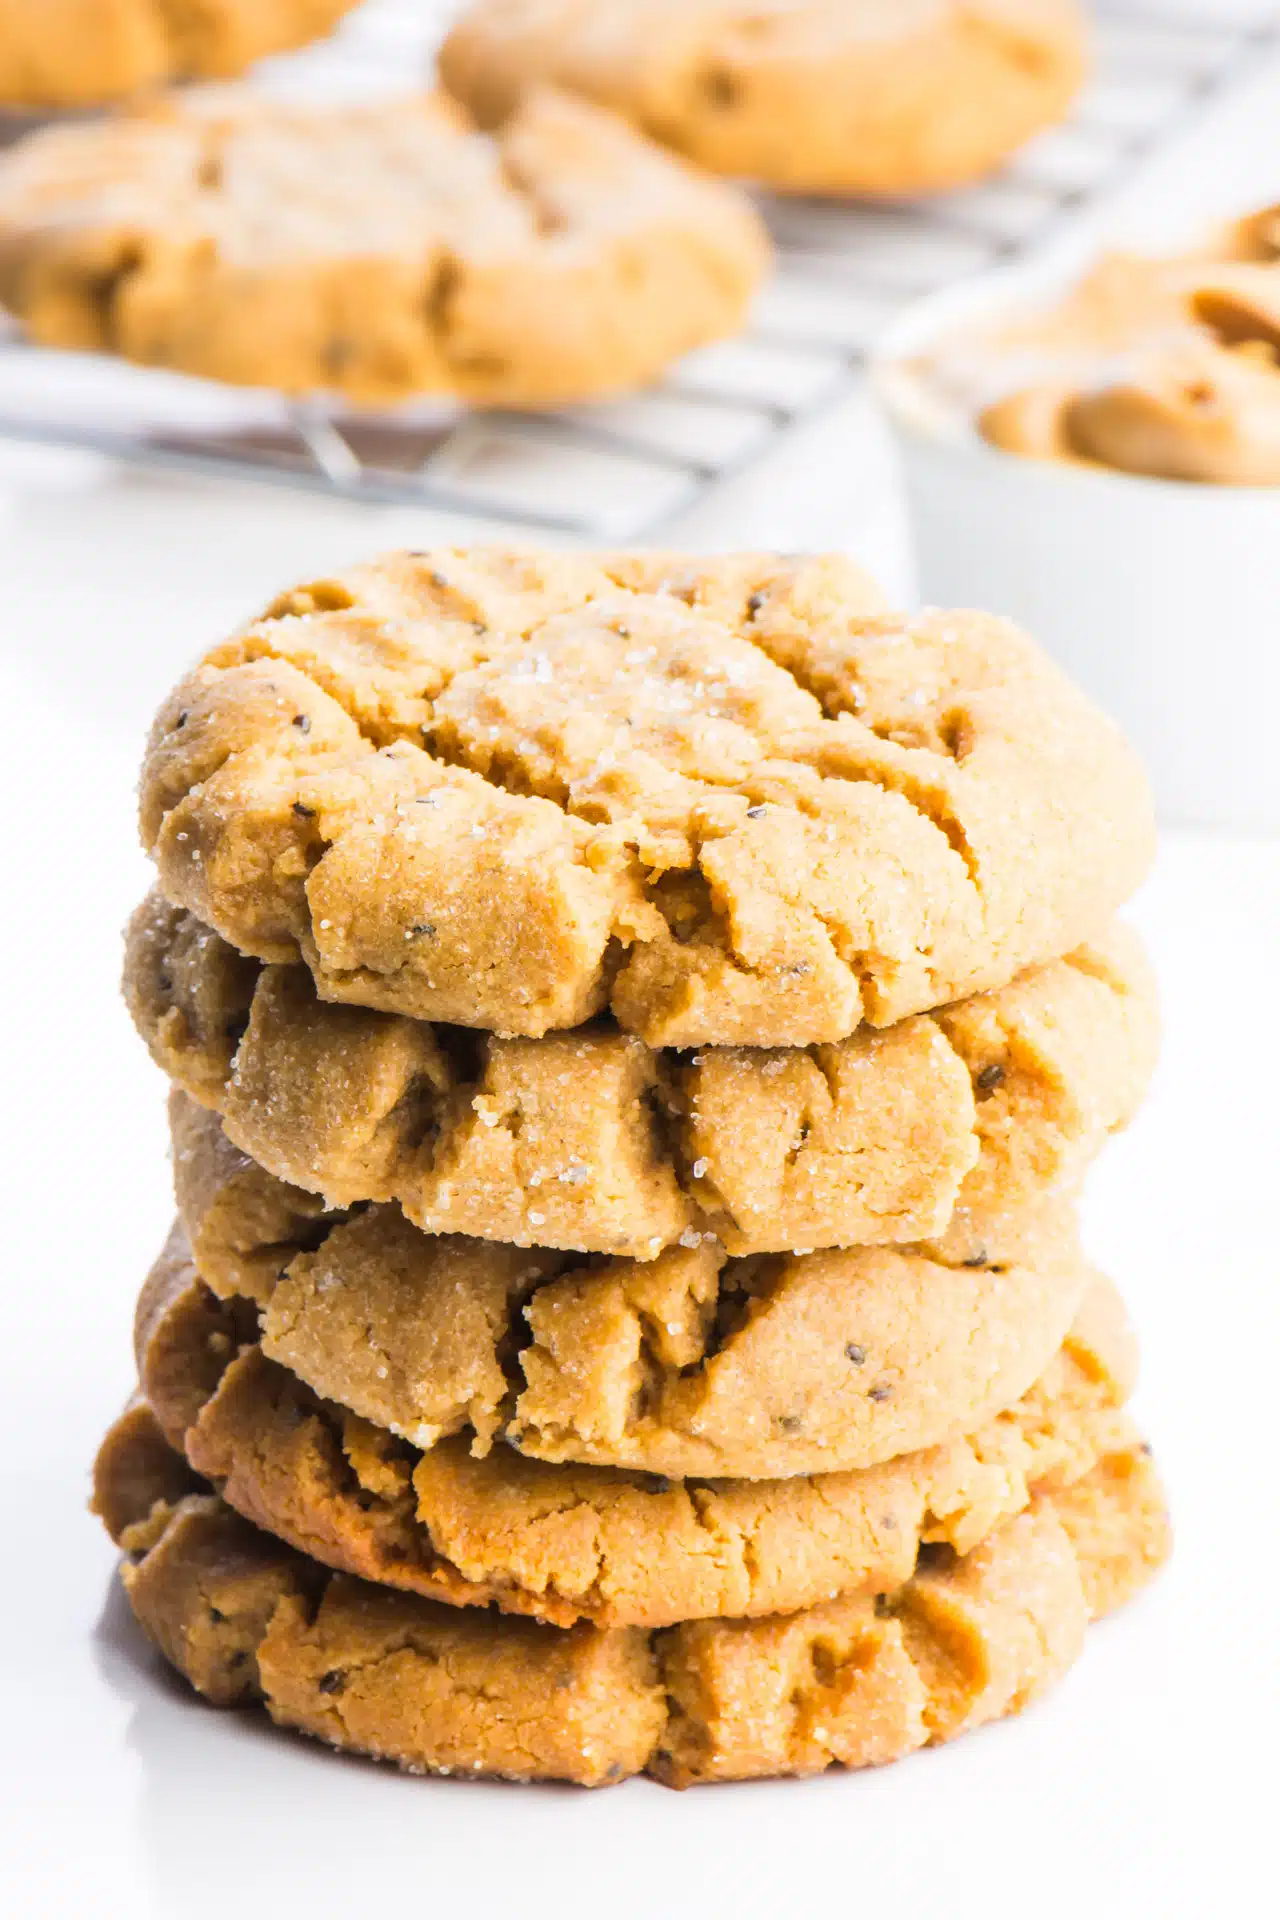 A stack of vegan peanut butter cookies sits in the foreground. Behind them is a white container full of peanut butter and a wire rack with more cookies cooling after being pulled from the oven.